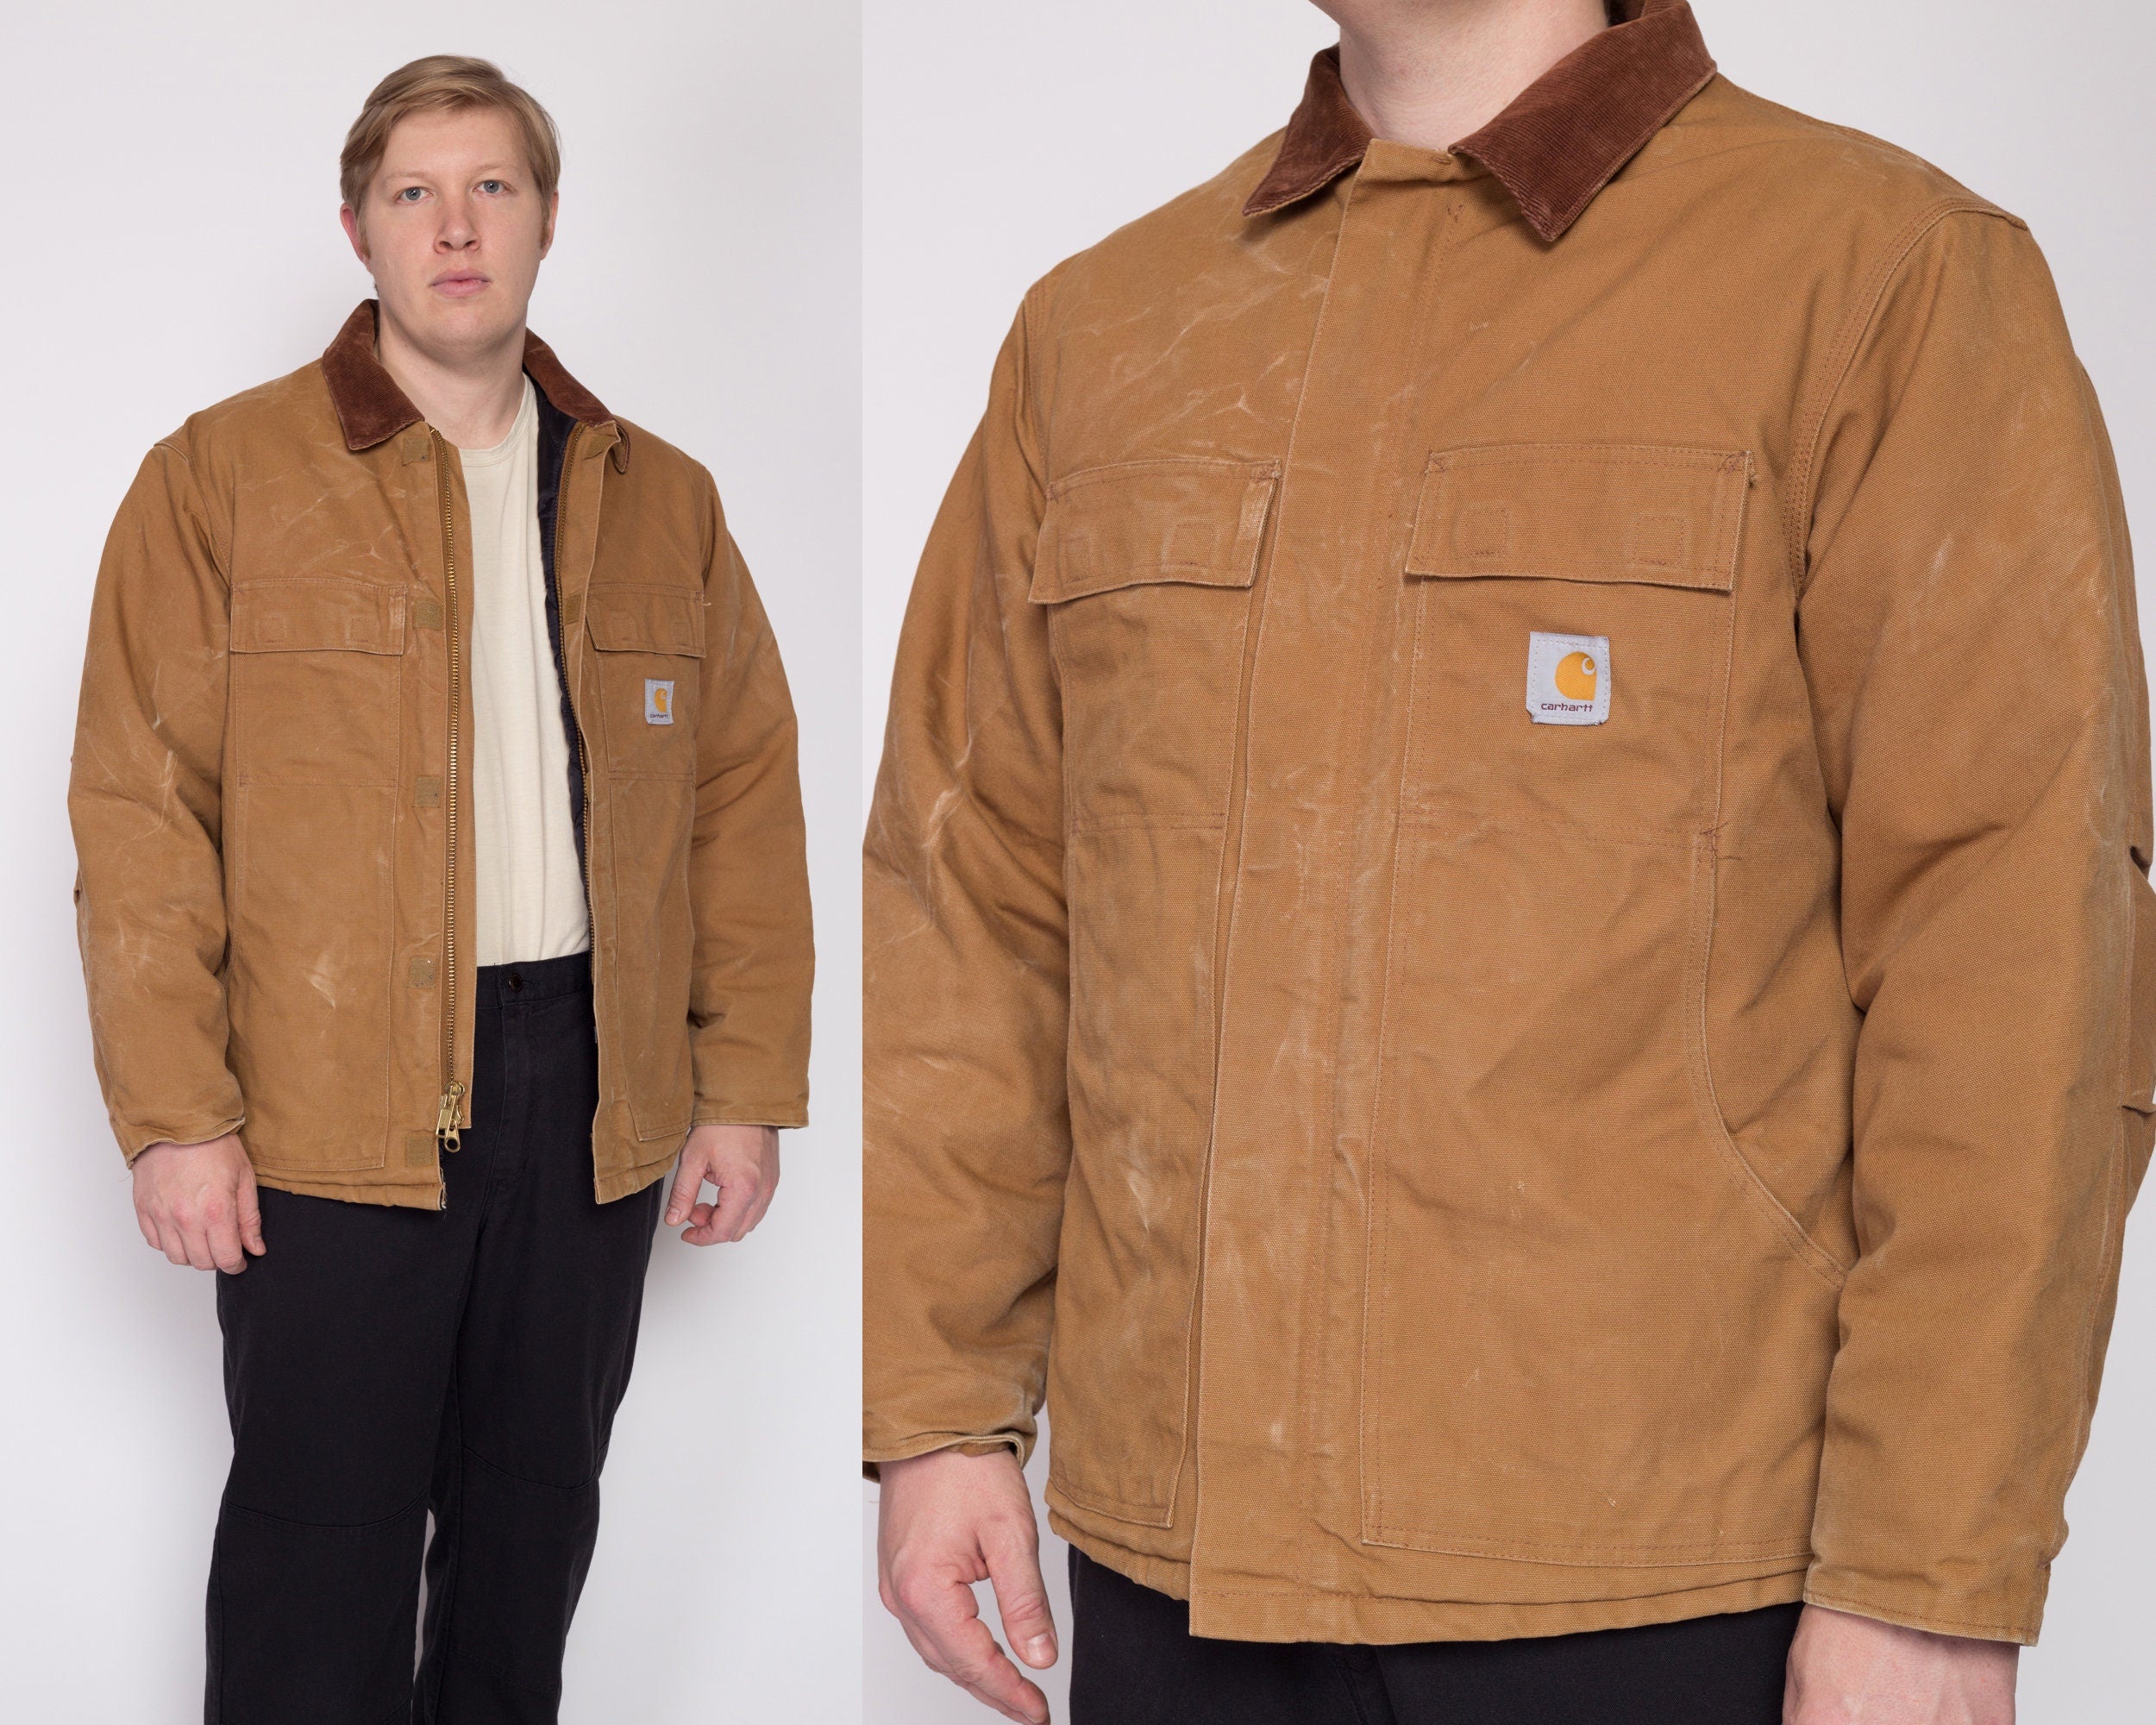 Vintage Carhartt Tan Insulated Arctic Jacket - Size 46